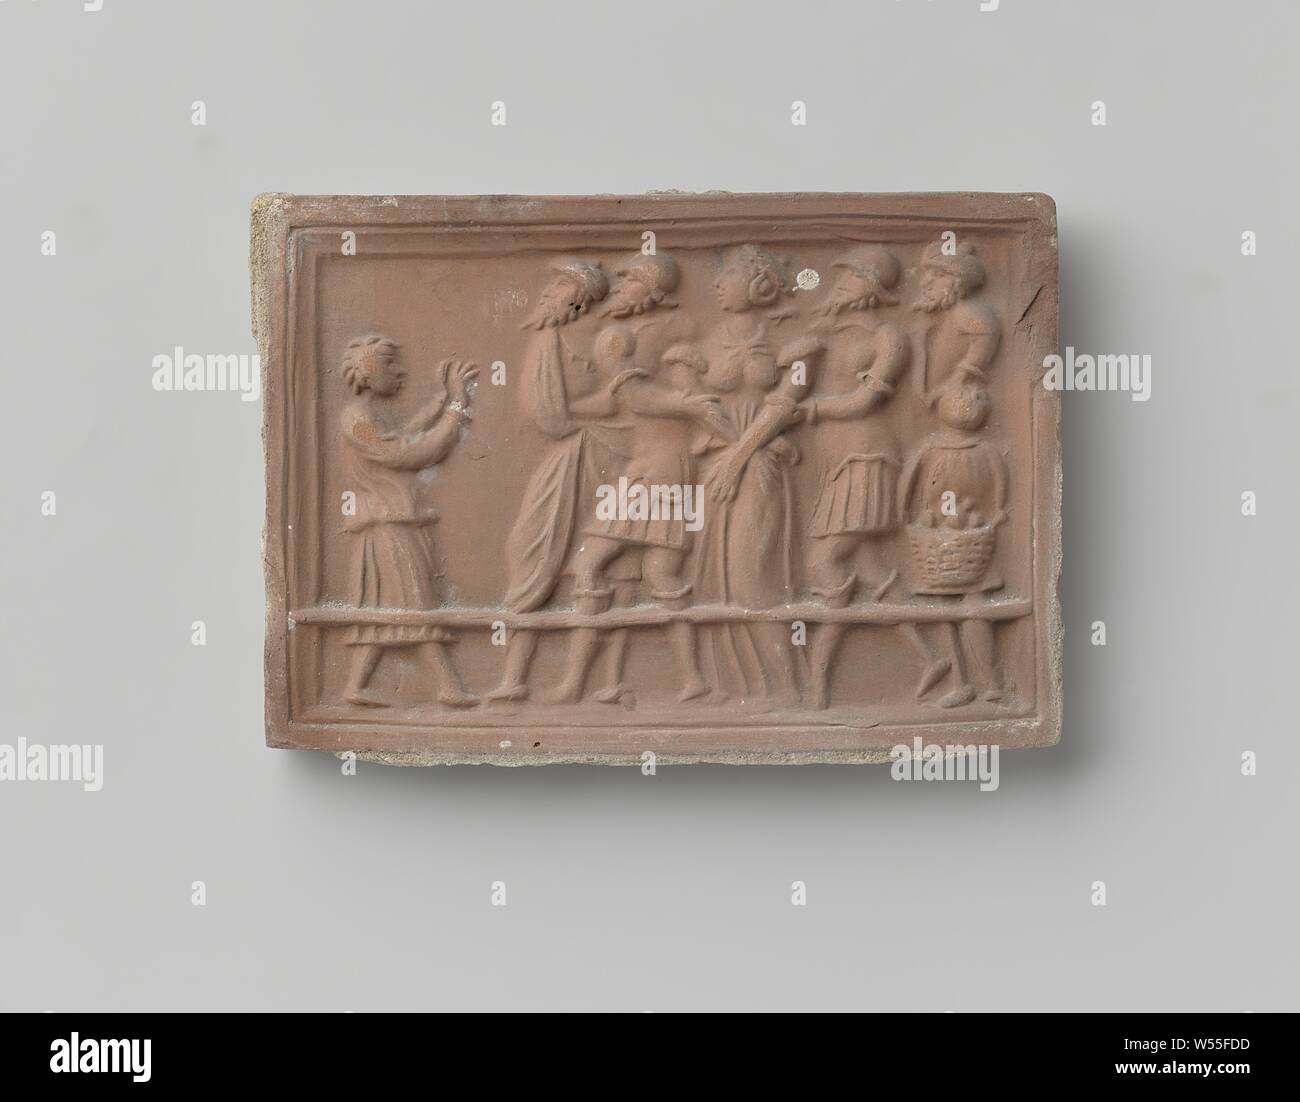 Fireplace with representation of the sentenced to death Suzanna, who is met by Daniel, who is met by Daniel. On the right a boy carries a basket with stones., anonymous, Netherlands, c. 1875 - c. 1900, earthenware, h 10 cm × w 14.5 cm × d 1.2 cm Stock Photo